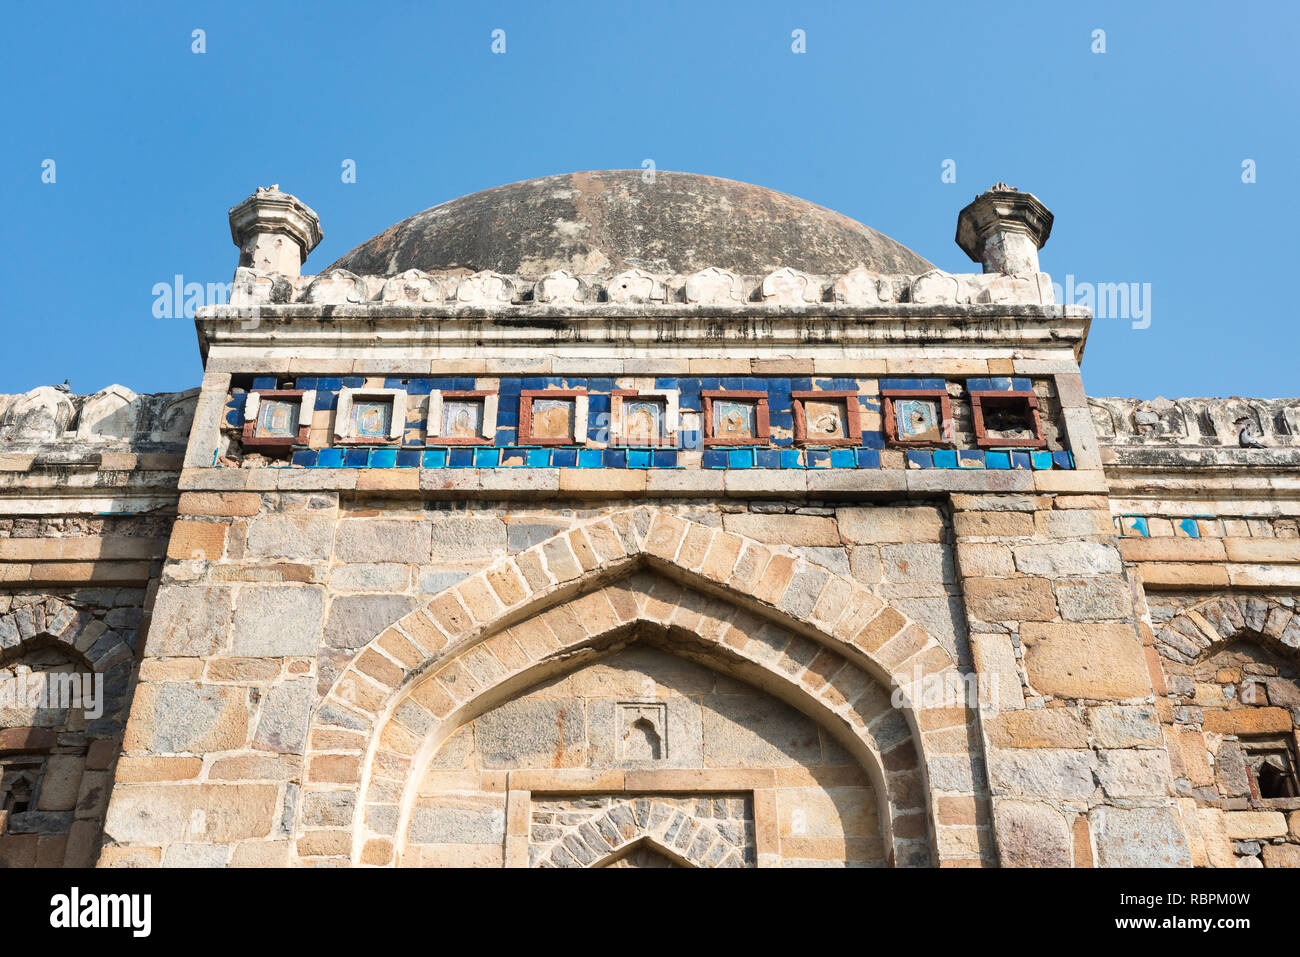 Dome and relics at the Lodi Gardens in New Delhi, India. Example of Mughal architecture. Stock Photo